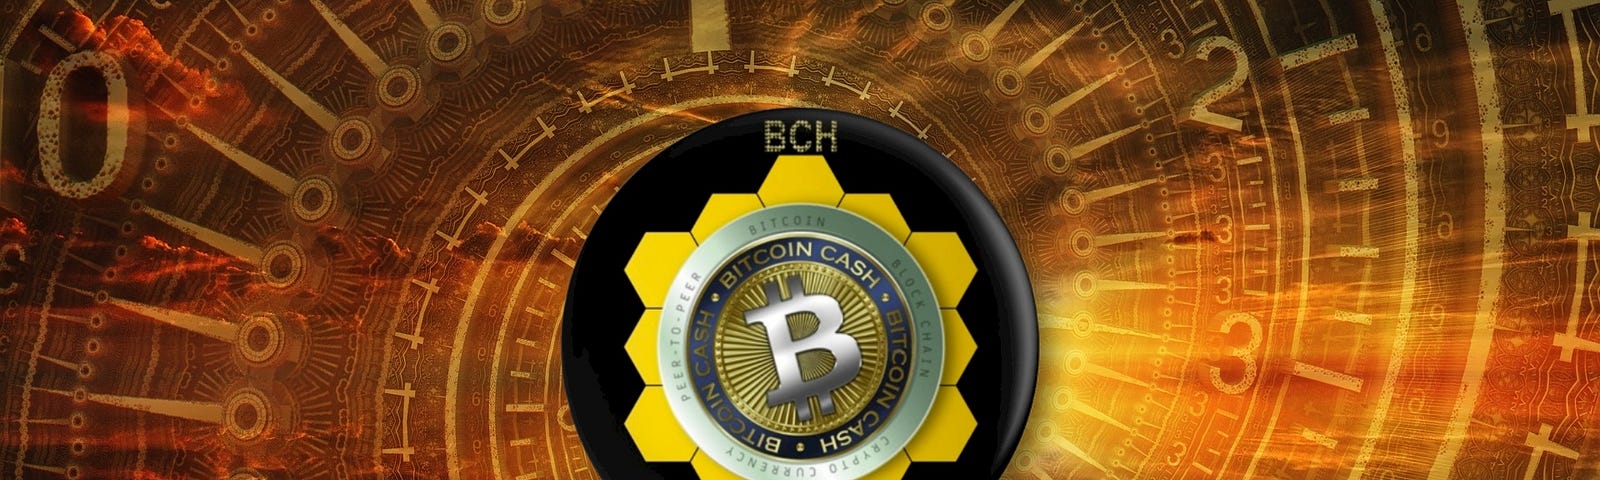 Background: a Sprial clock with brown color. In the middle I added a custom made logo of Bitcoin Cash.